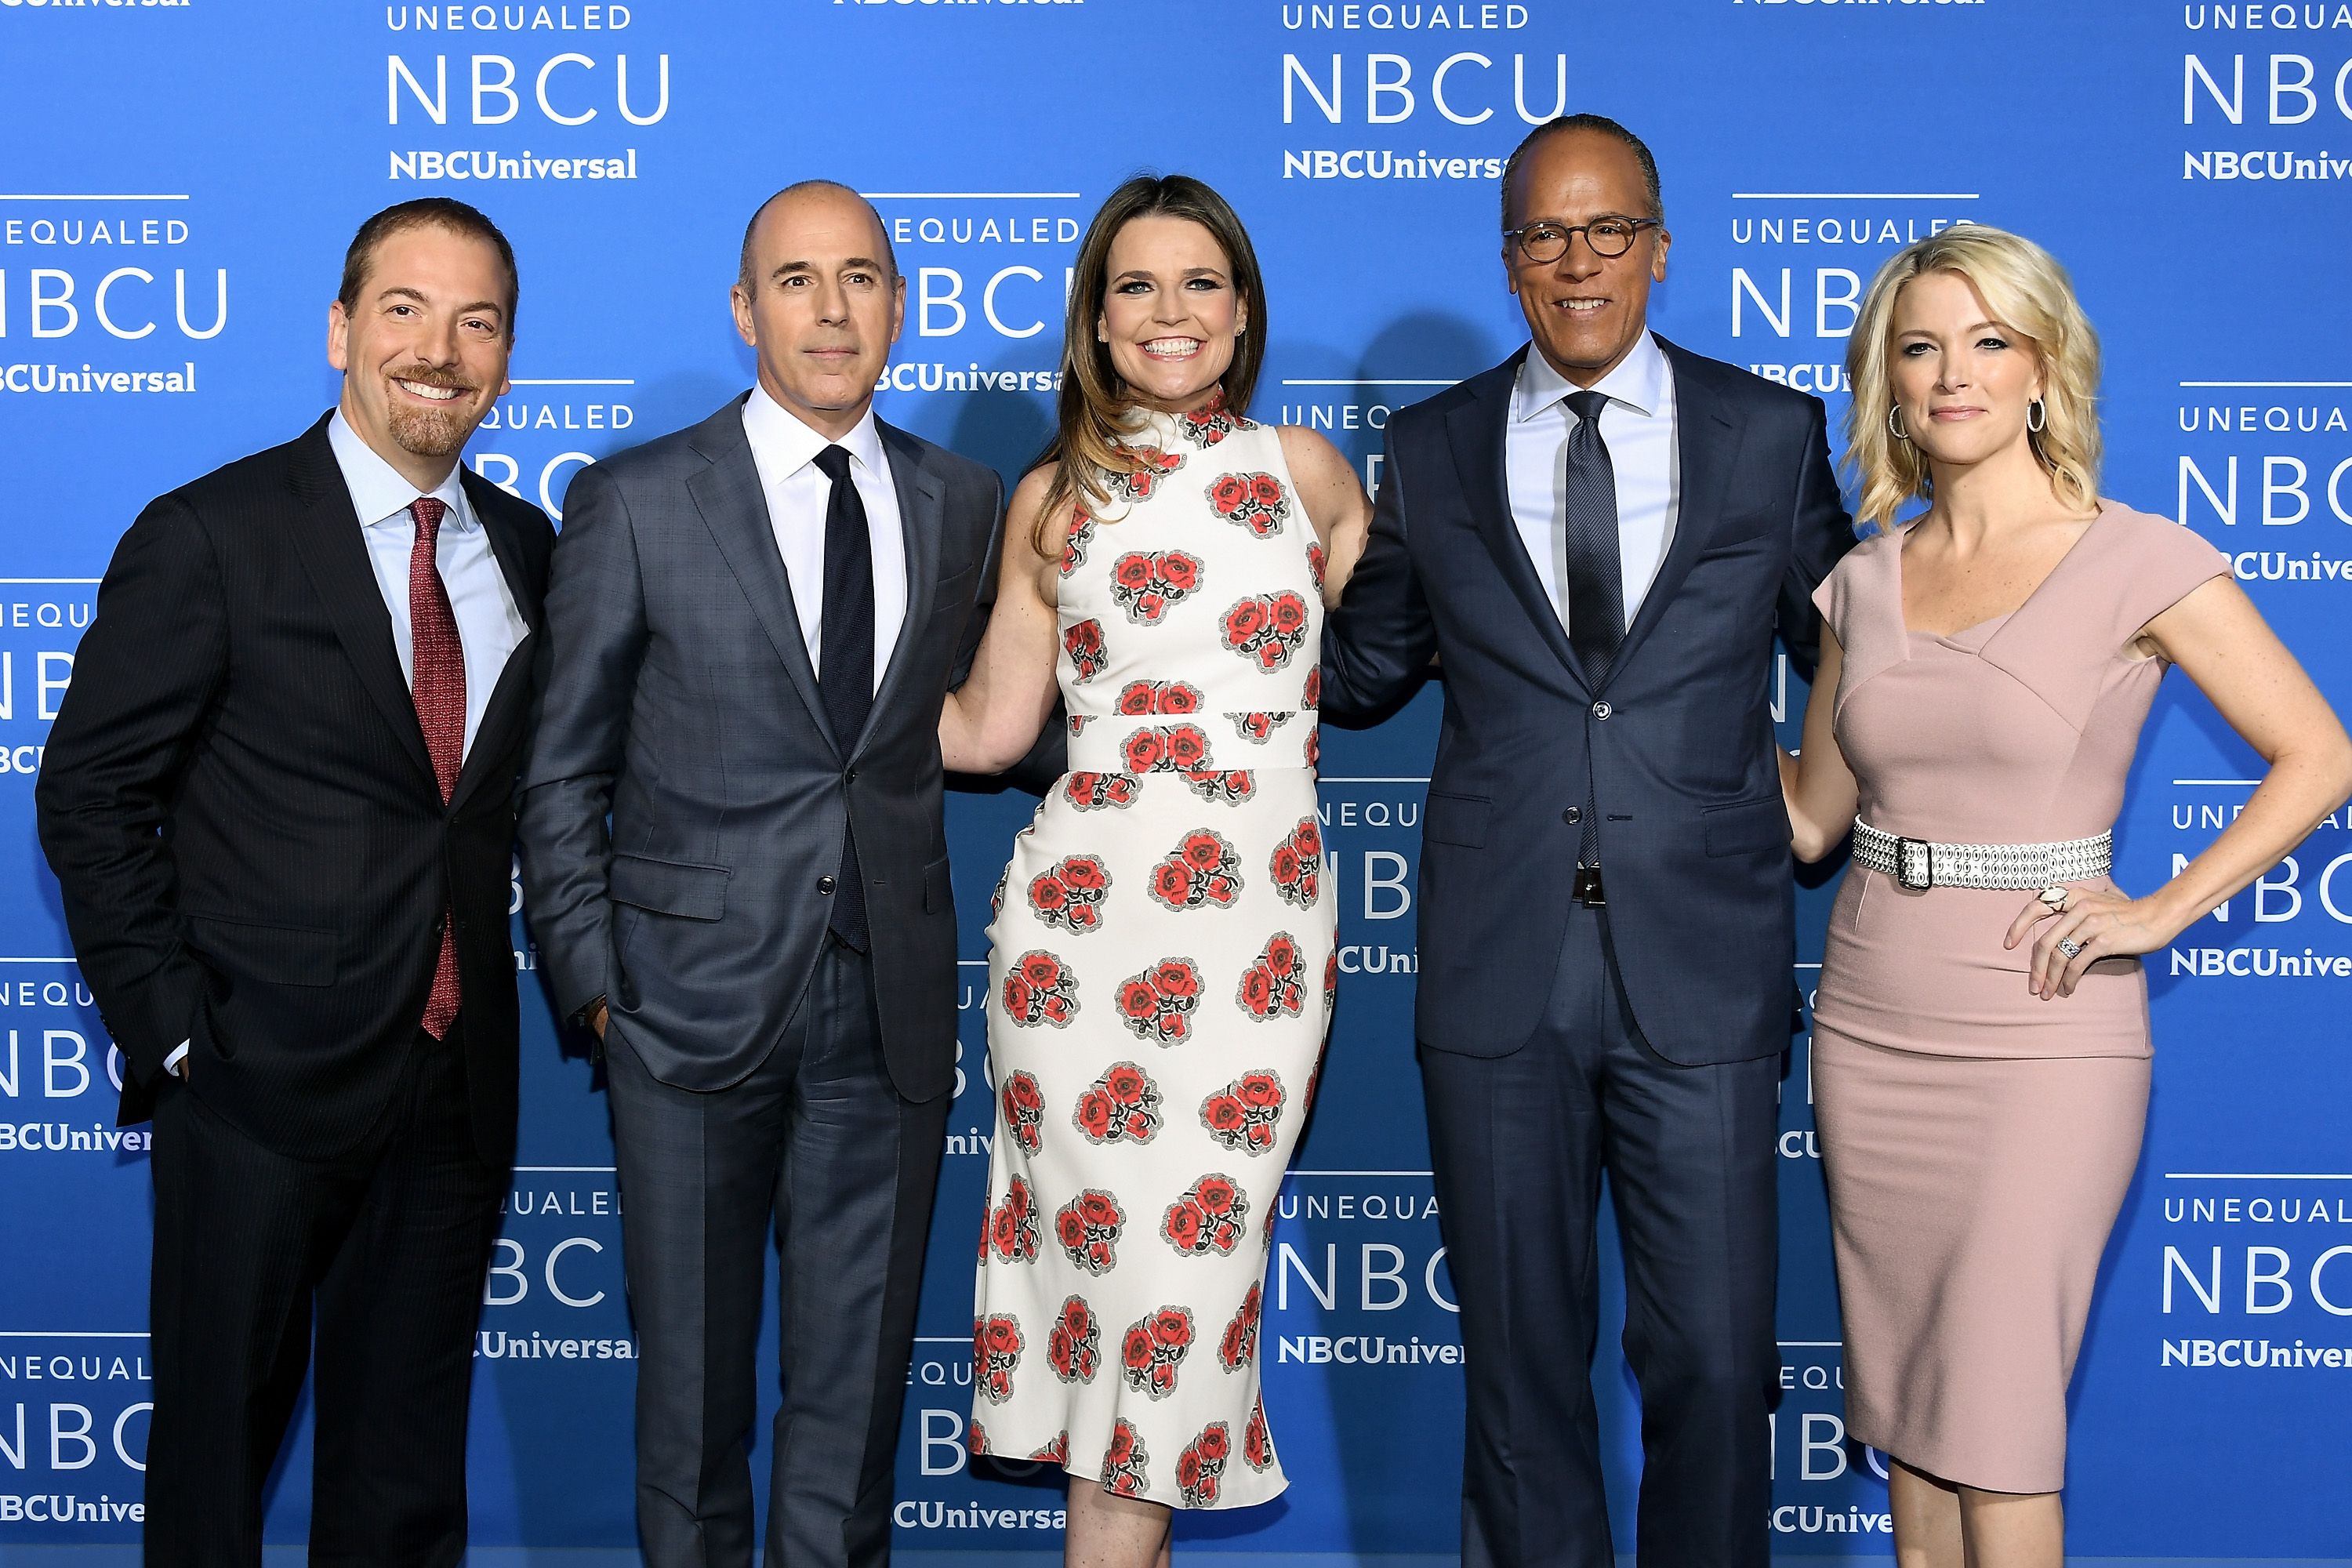 Chuck Todd, Matt Lauer, Savannah Guthrie, Lester Holt, and Megyn Kelly attend the 2017 NBCUniversal Upfront at Radio City Music Hall on May 15, 2017. | Photo: Getty Images.